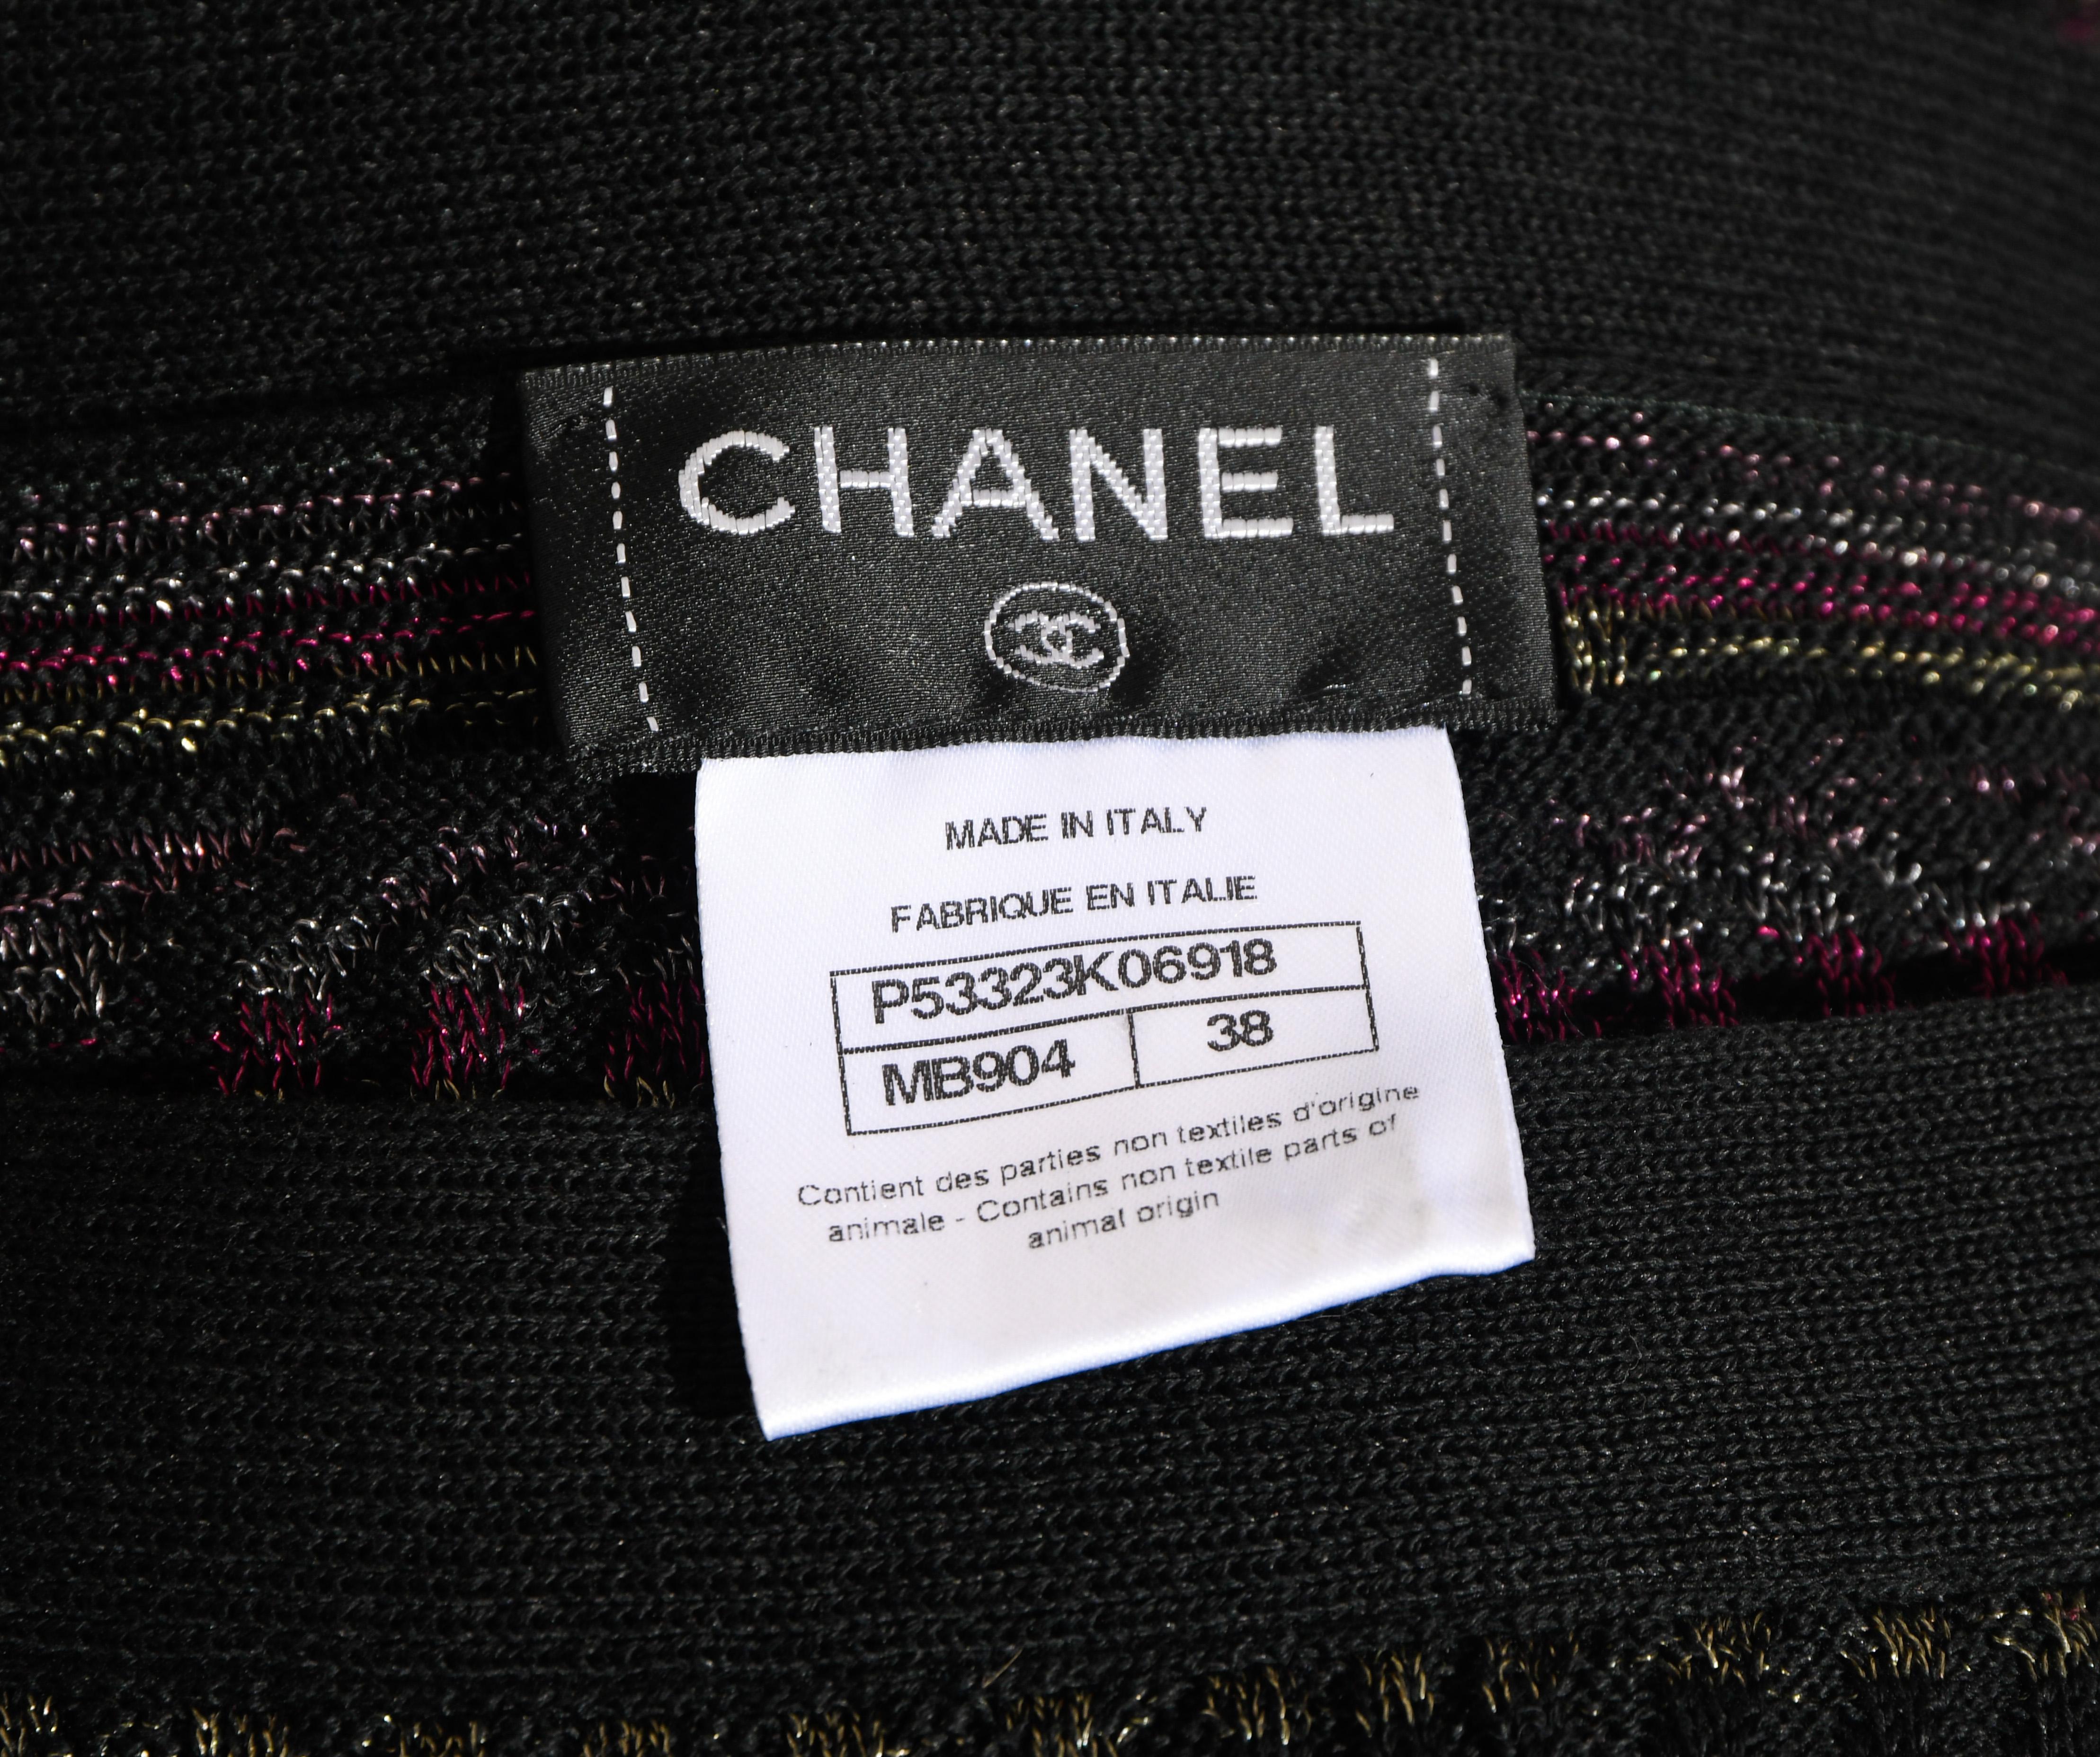 Chanel Textured Knit Dress Black/Purple/Silver Throughout  For Sale 1